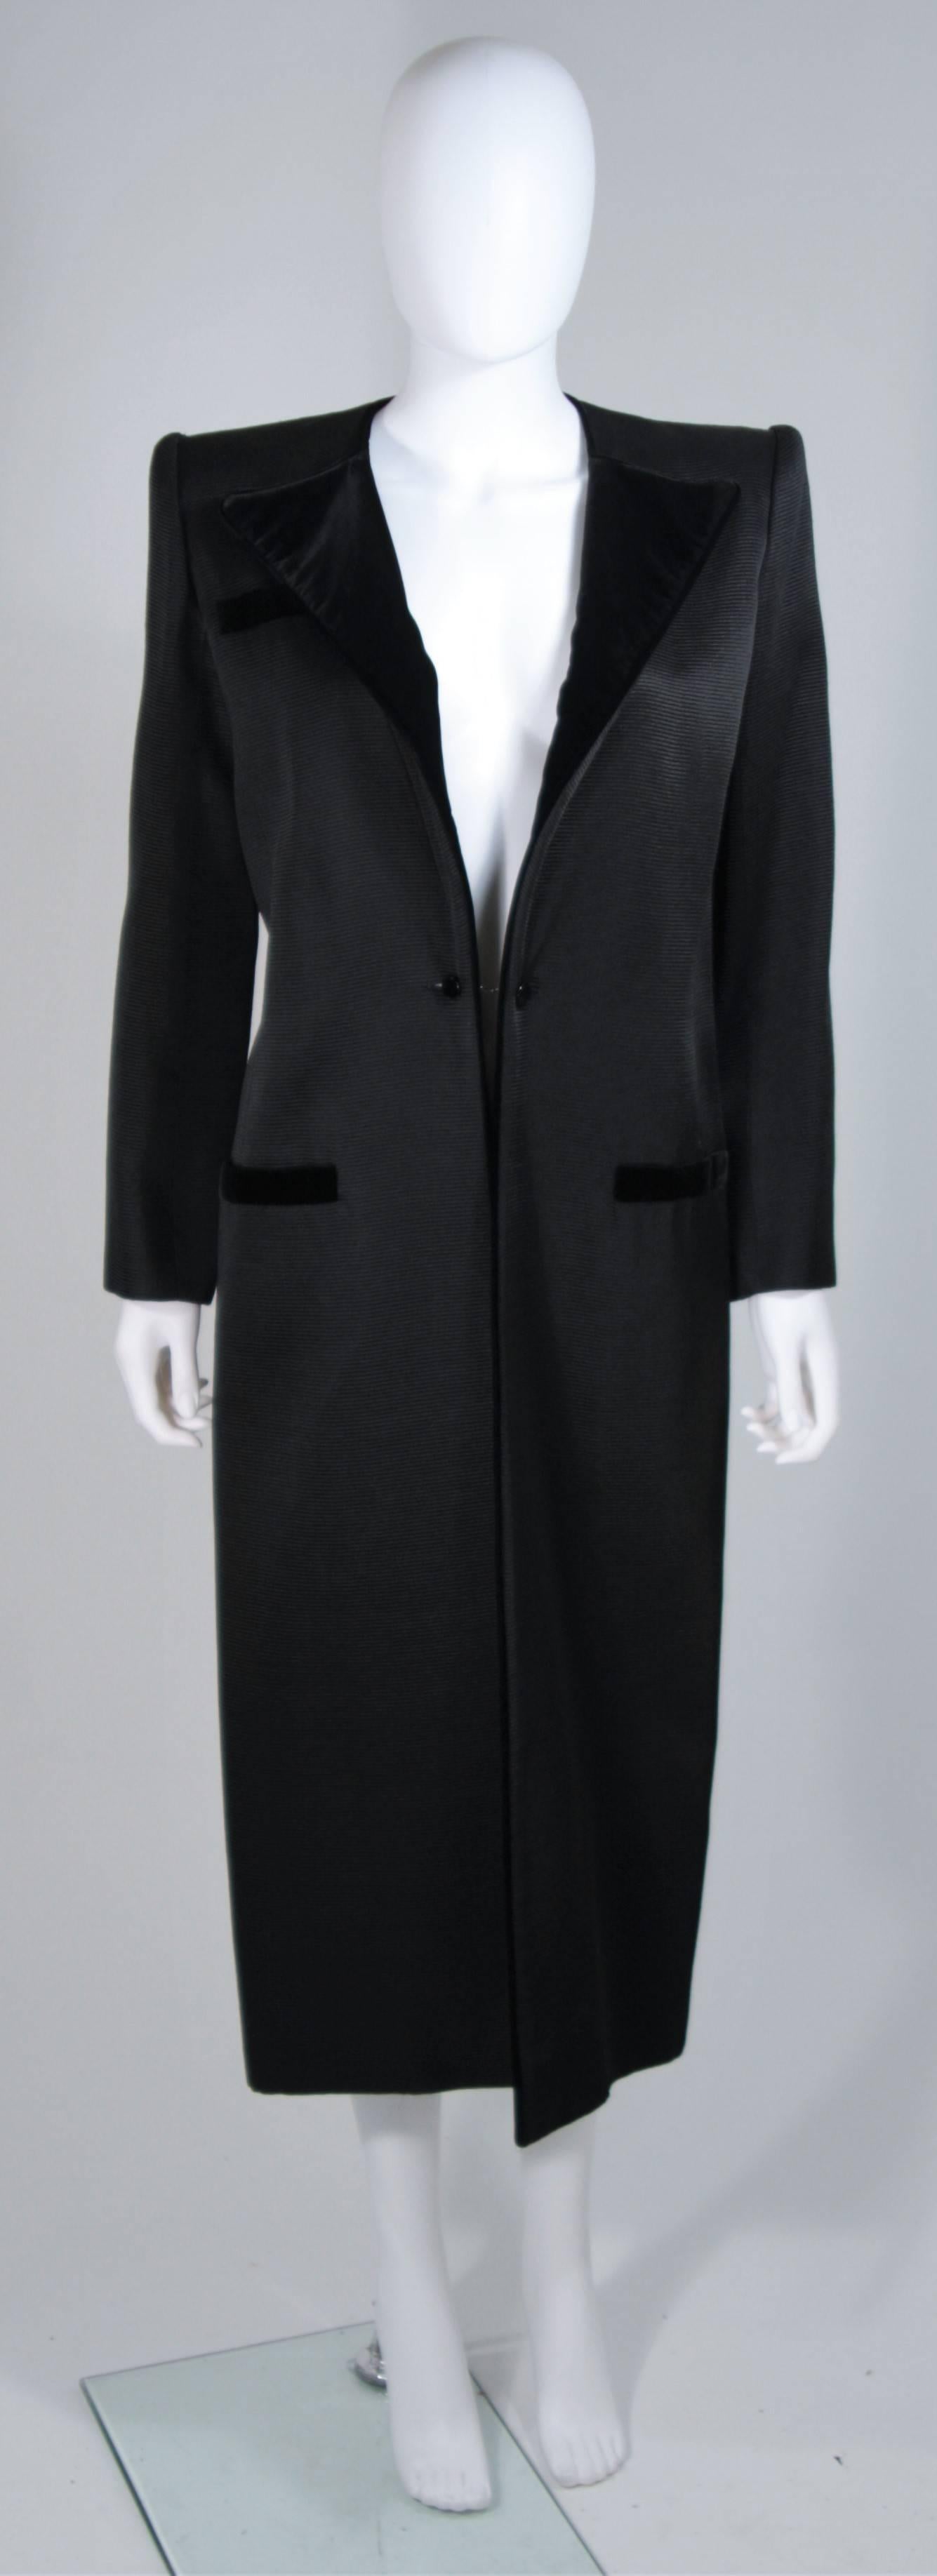   This Valentino  evening coat is composed of a black ribbed silk with velvet trim. Features a center front button closure and front pockets. In excellent vintage condition. 

  **Please cross-reference measurements for personal accuracy.